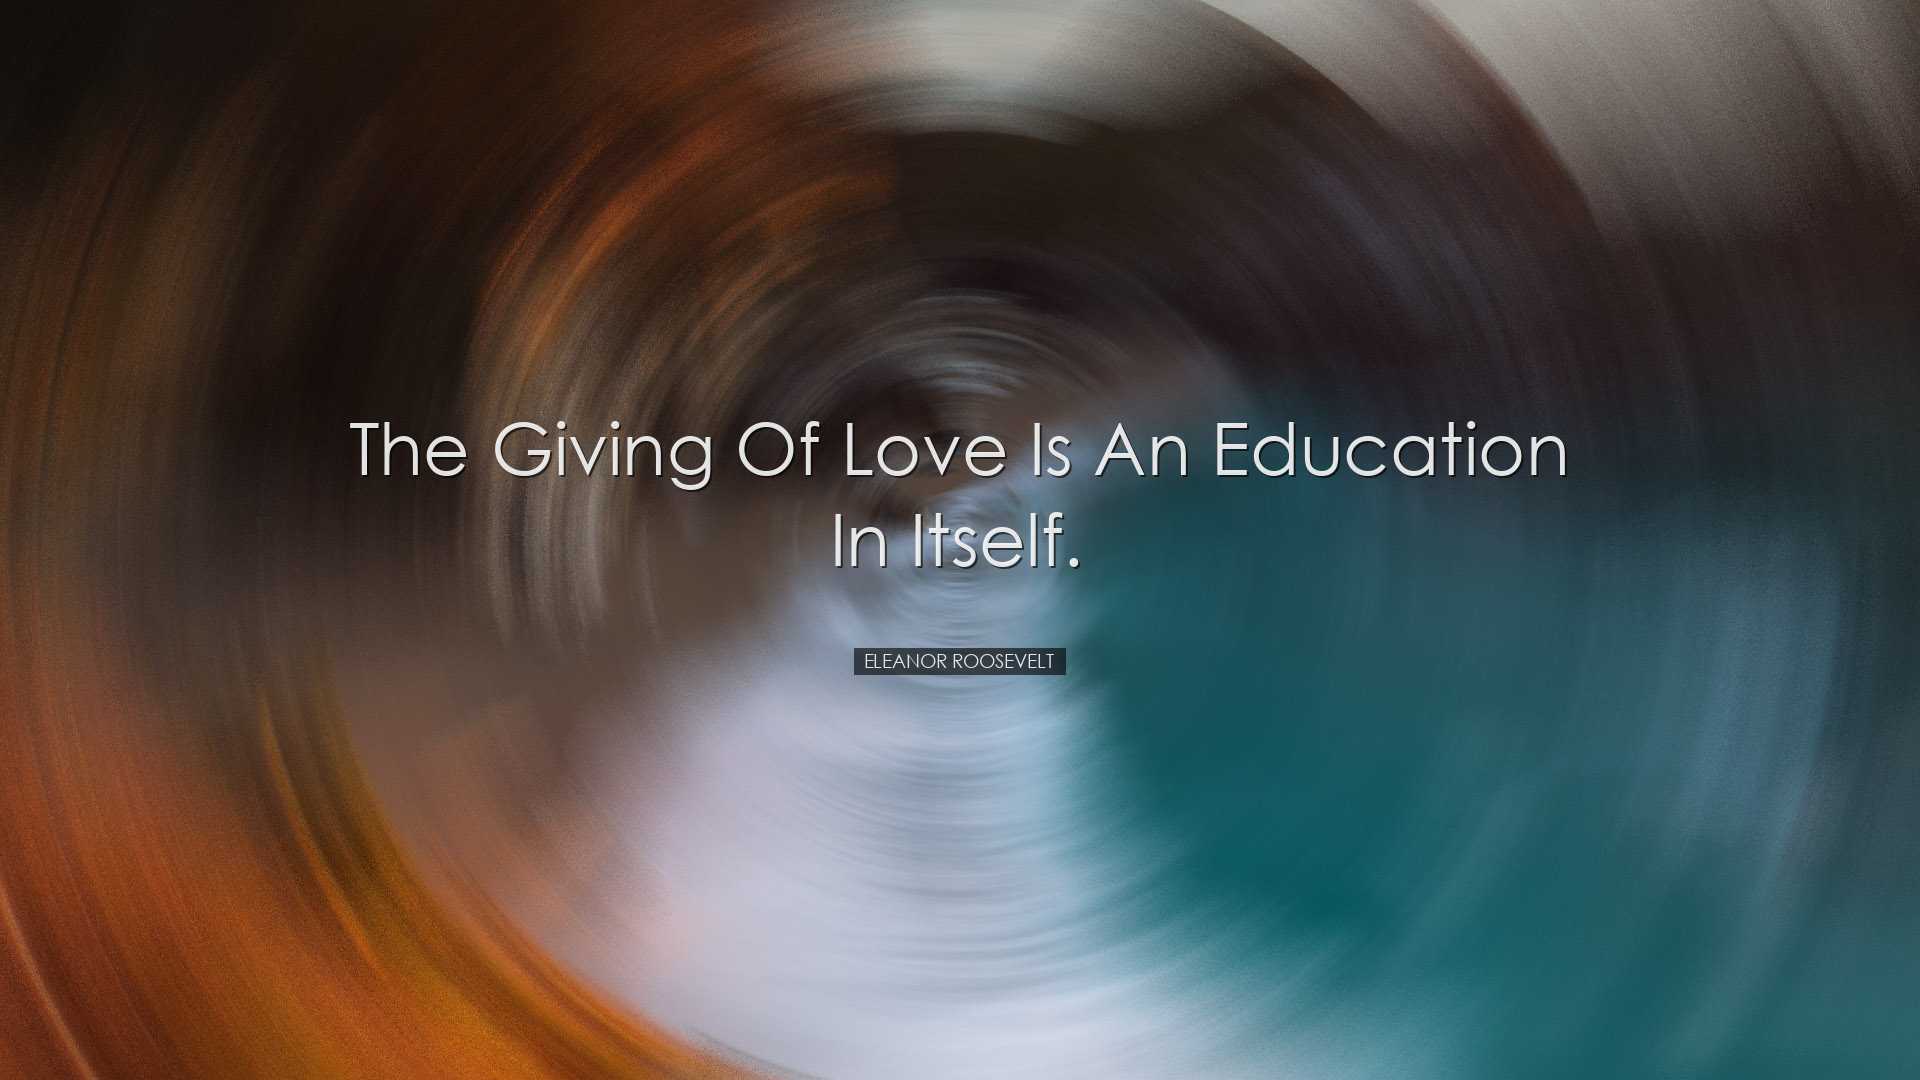 The giving of love is an education in itself. - Eleanor Roosevelt